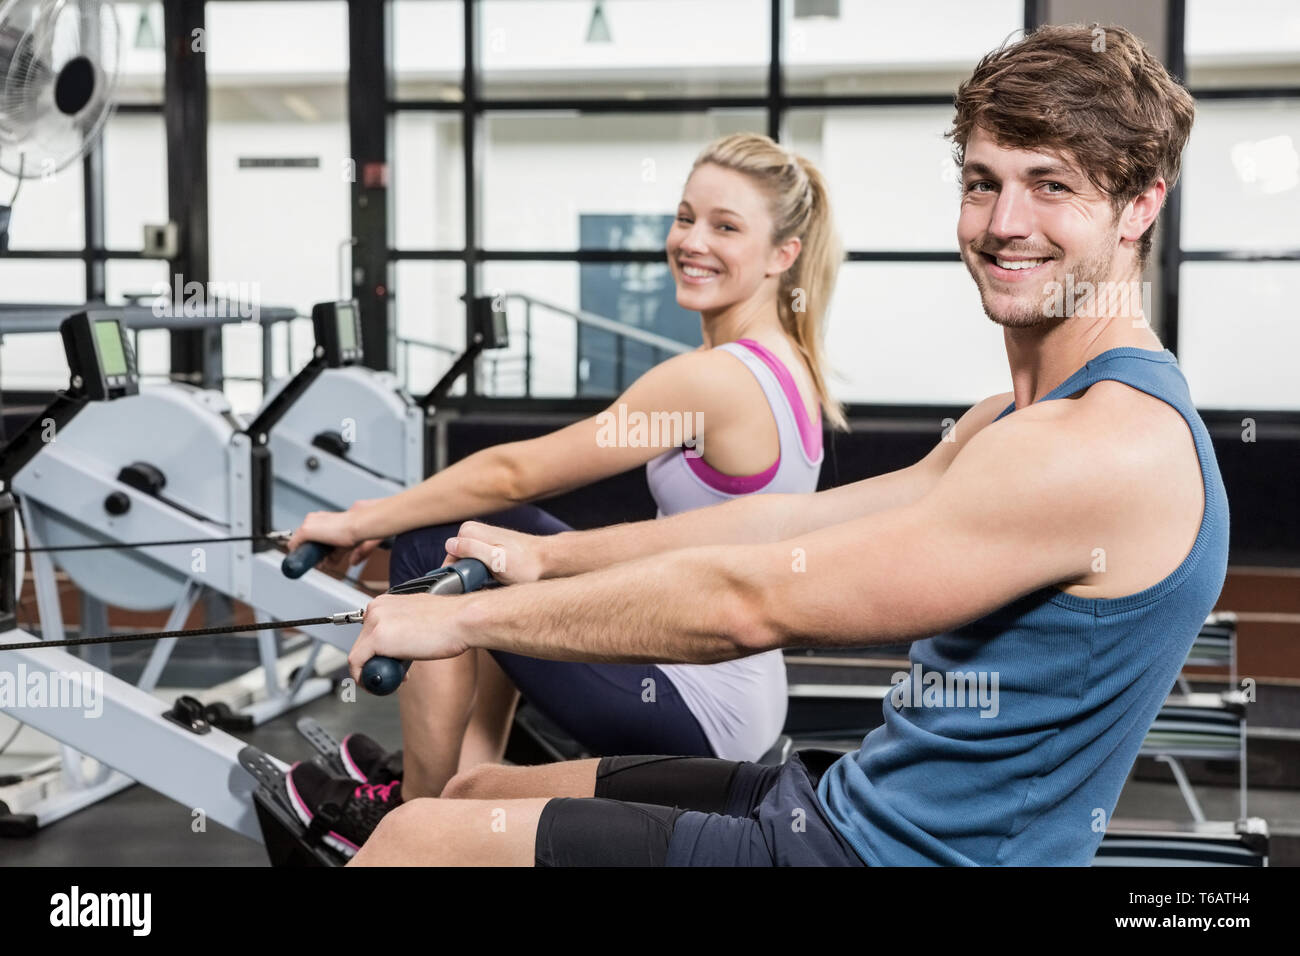 Portrait of a man and woman working out on rowing machine Stock Photo